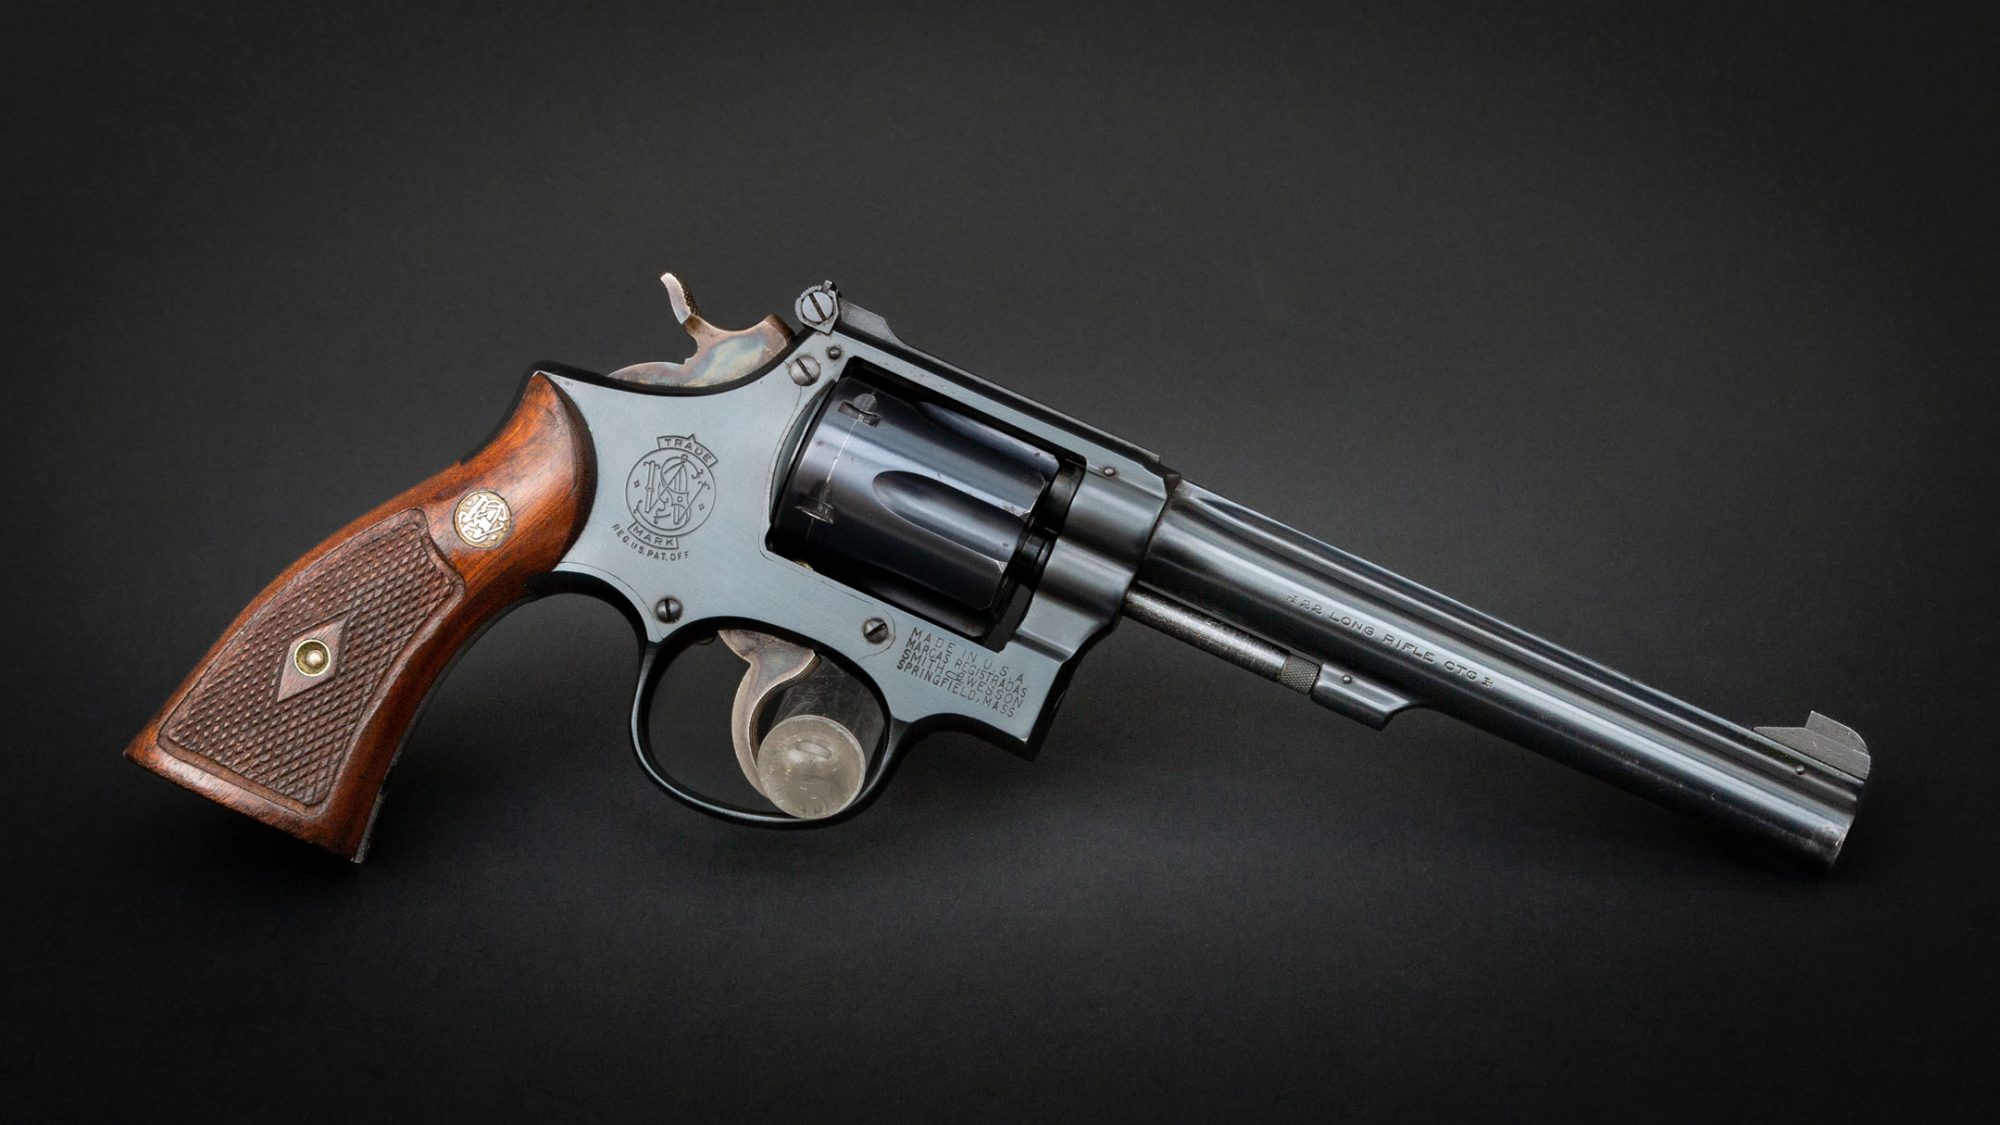 Smith & Wesson Model K22 Masterpiece, for sale by Turnbull Restoration Co. of Bloomfield, NY